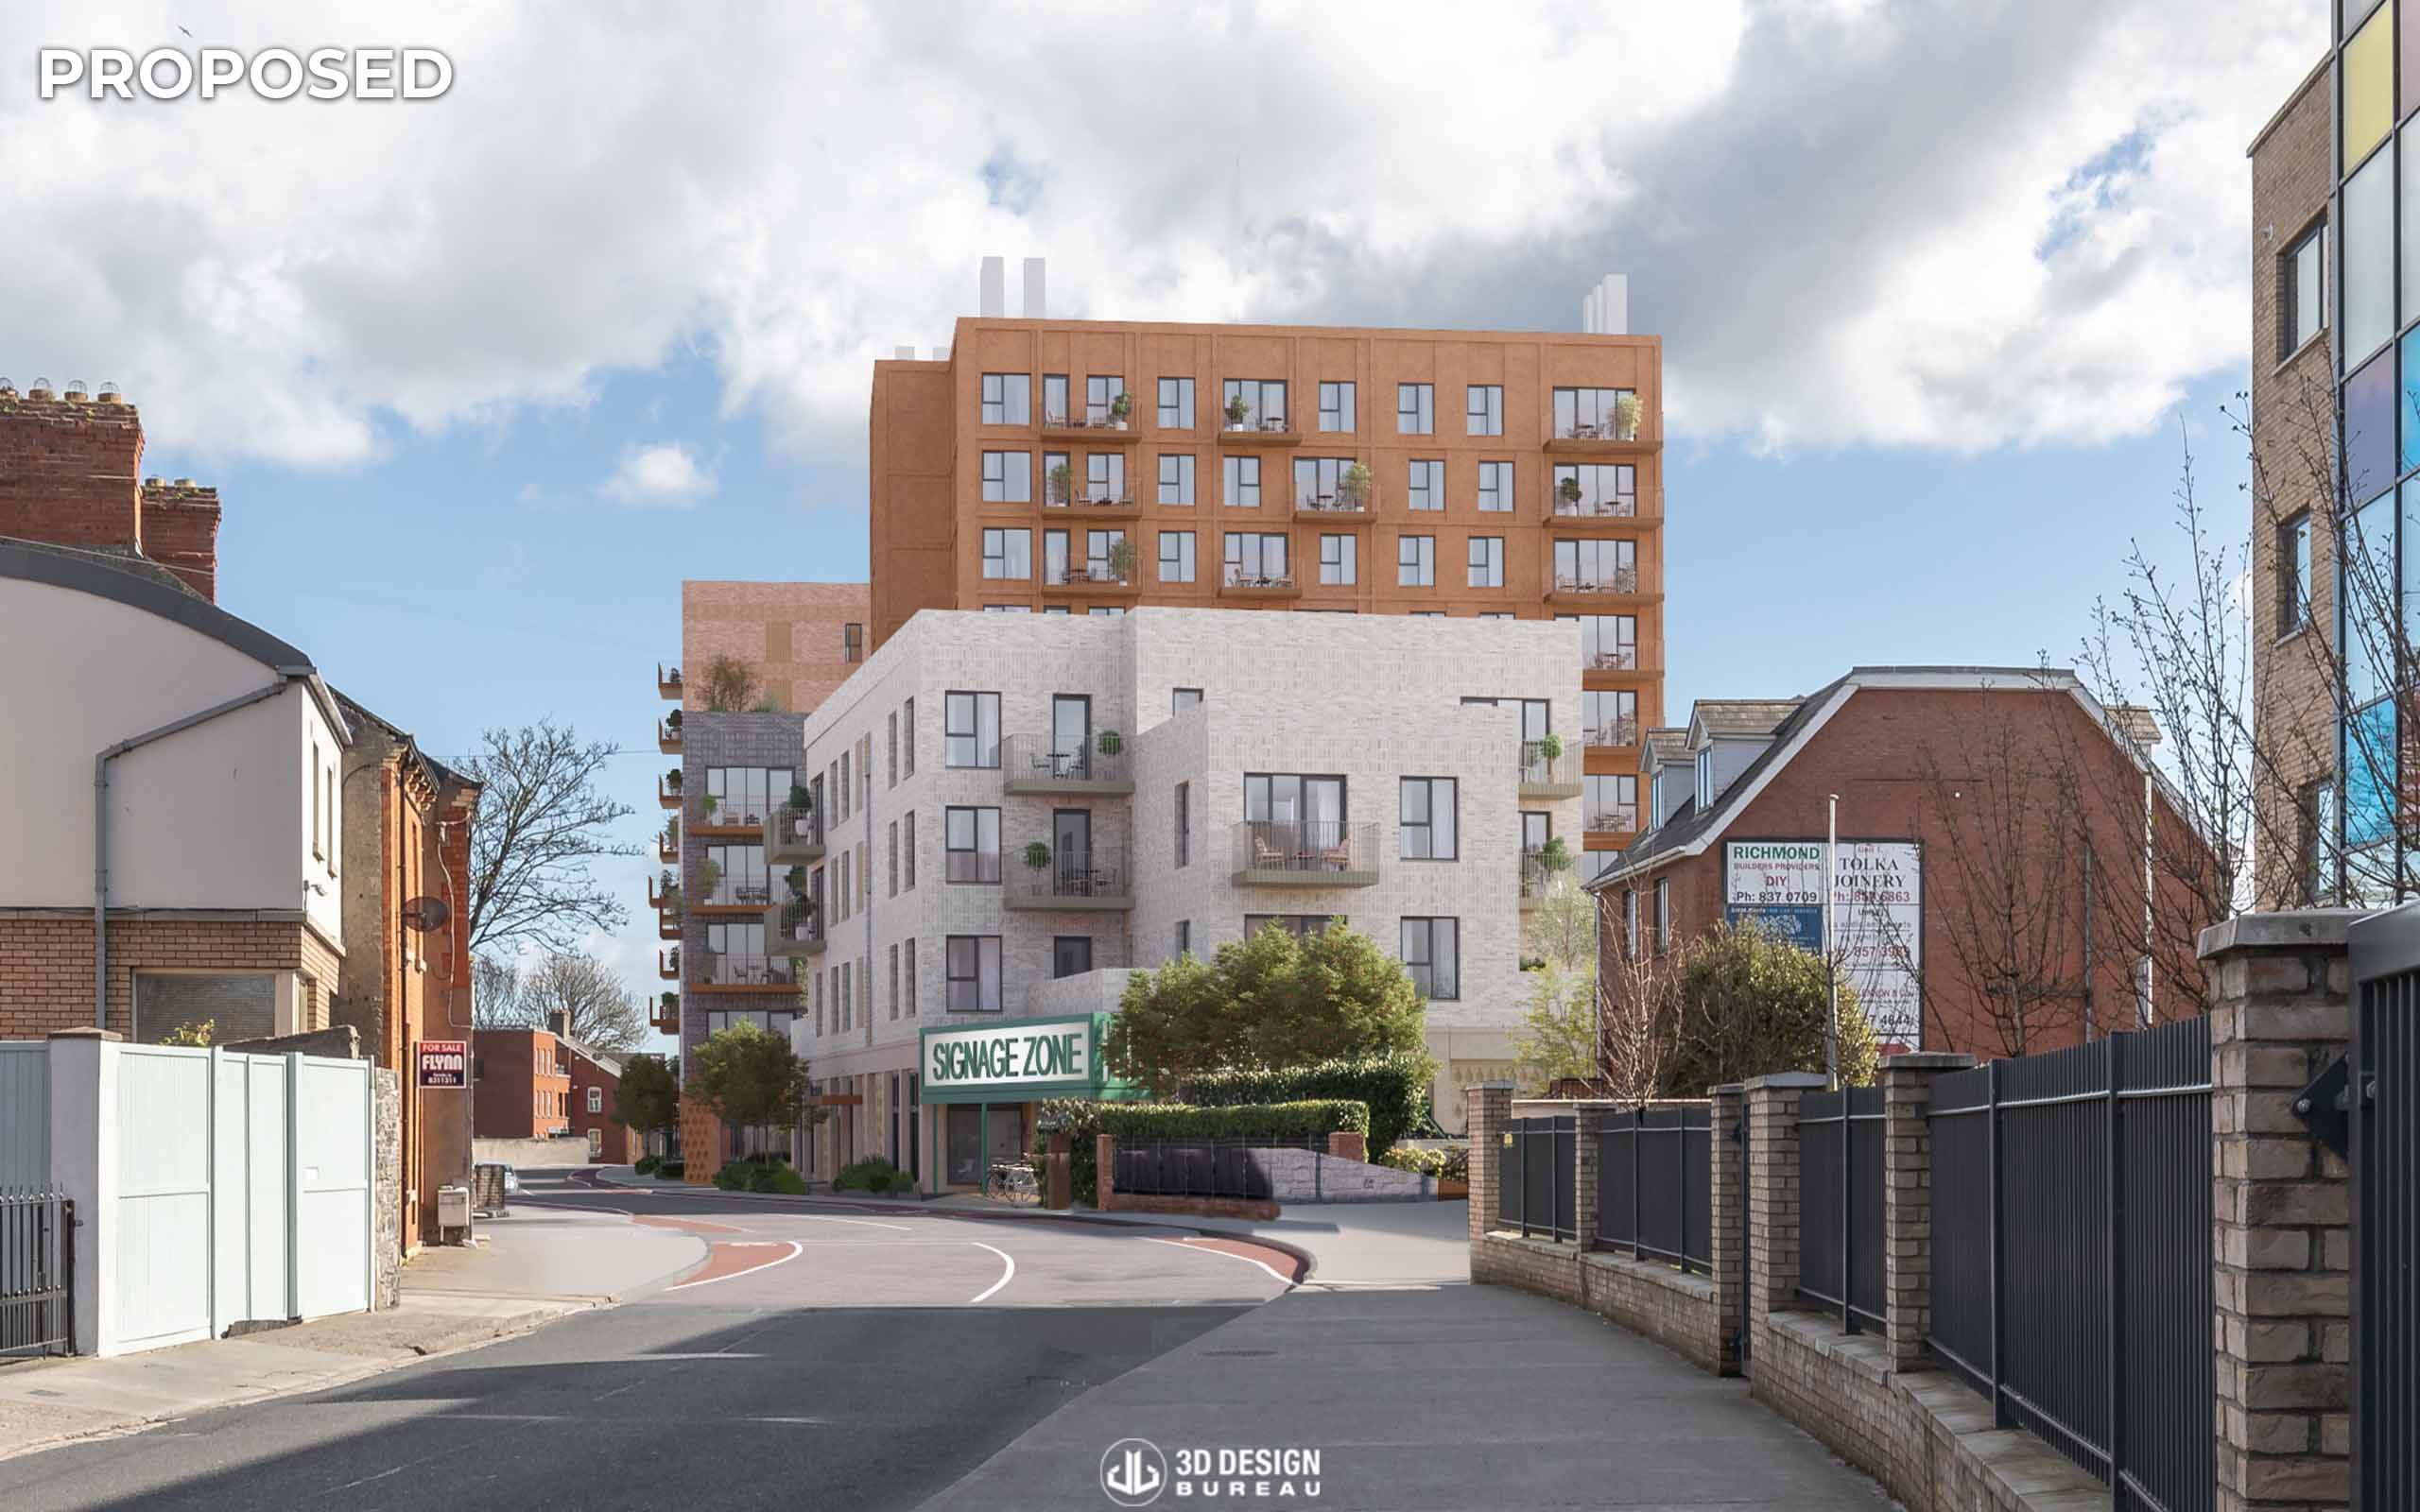 Verified View montage of the proposed development in Richmond road, Dublin for visual impact assessment(proposed)